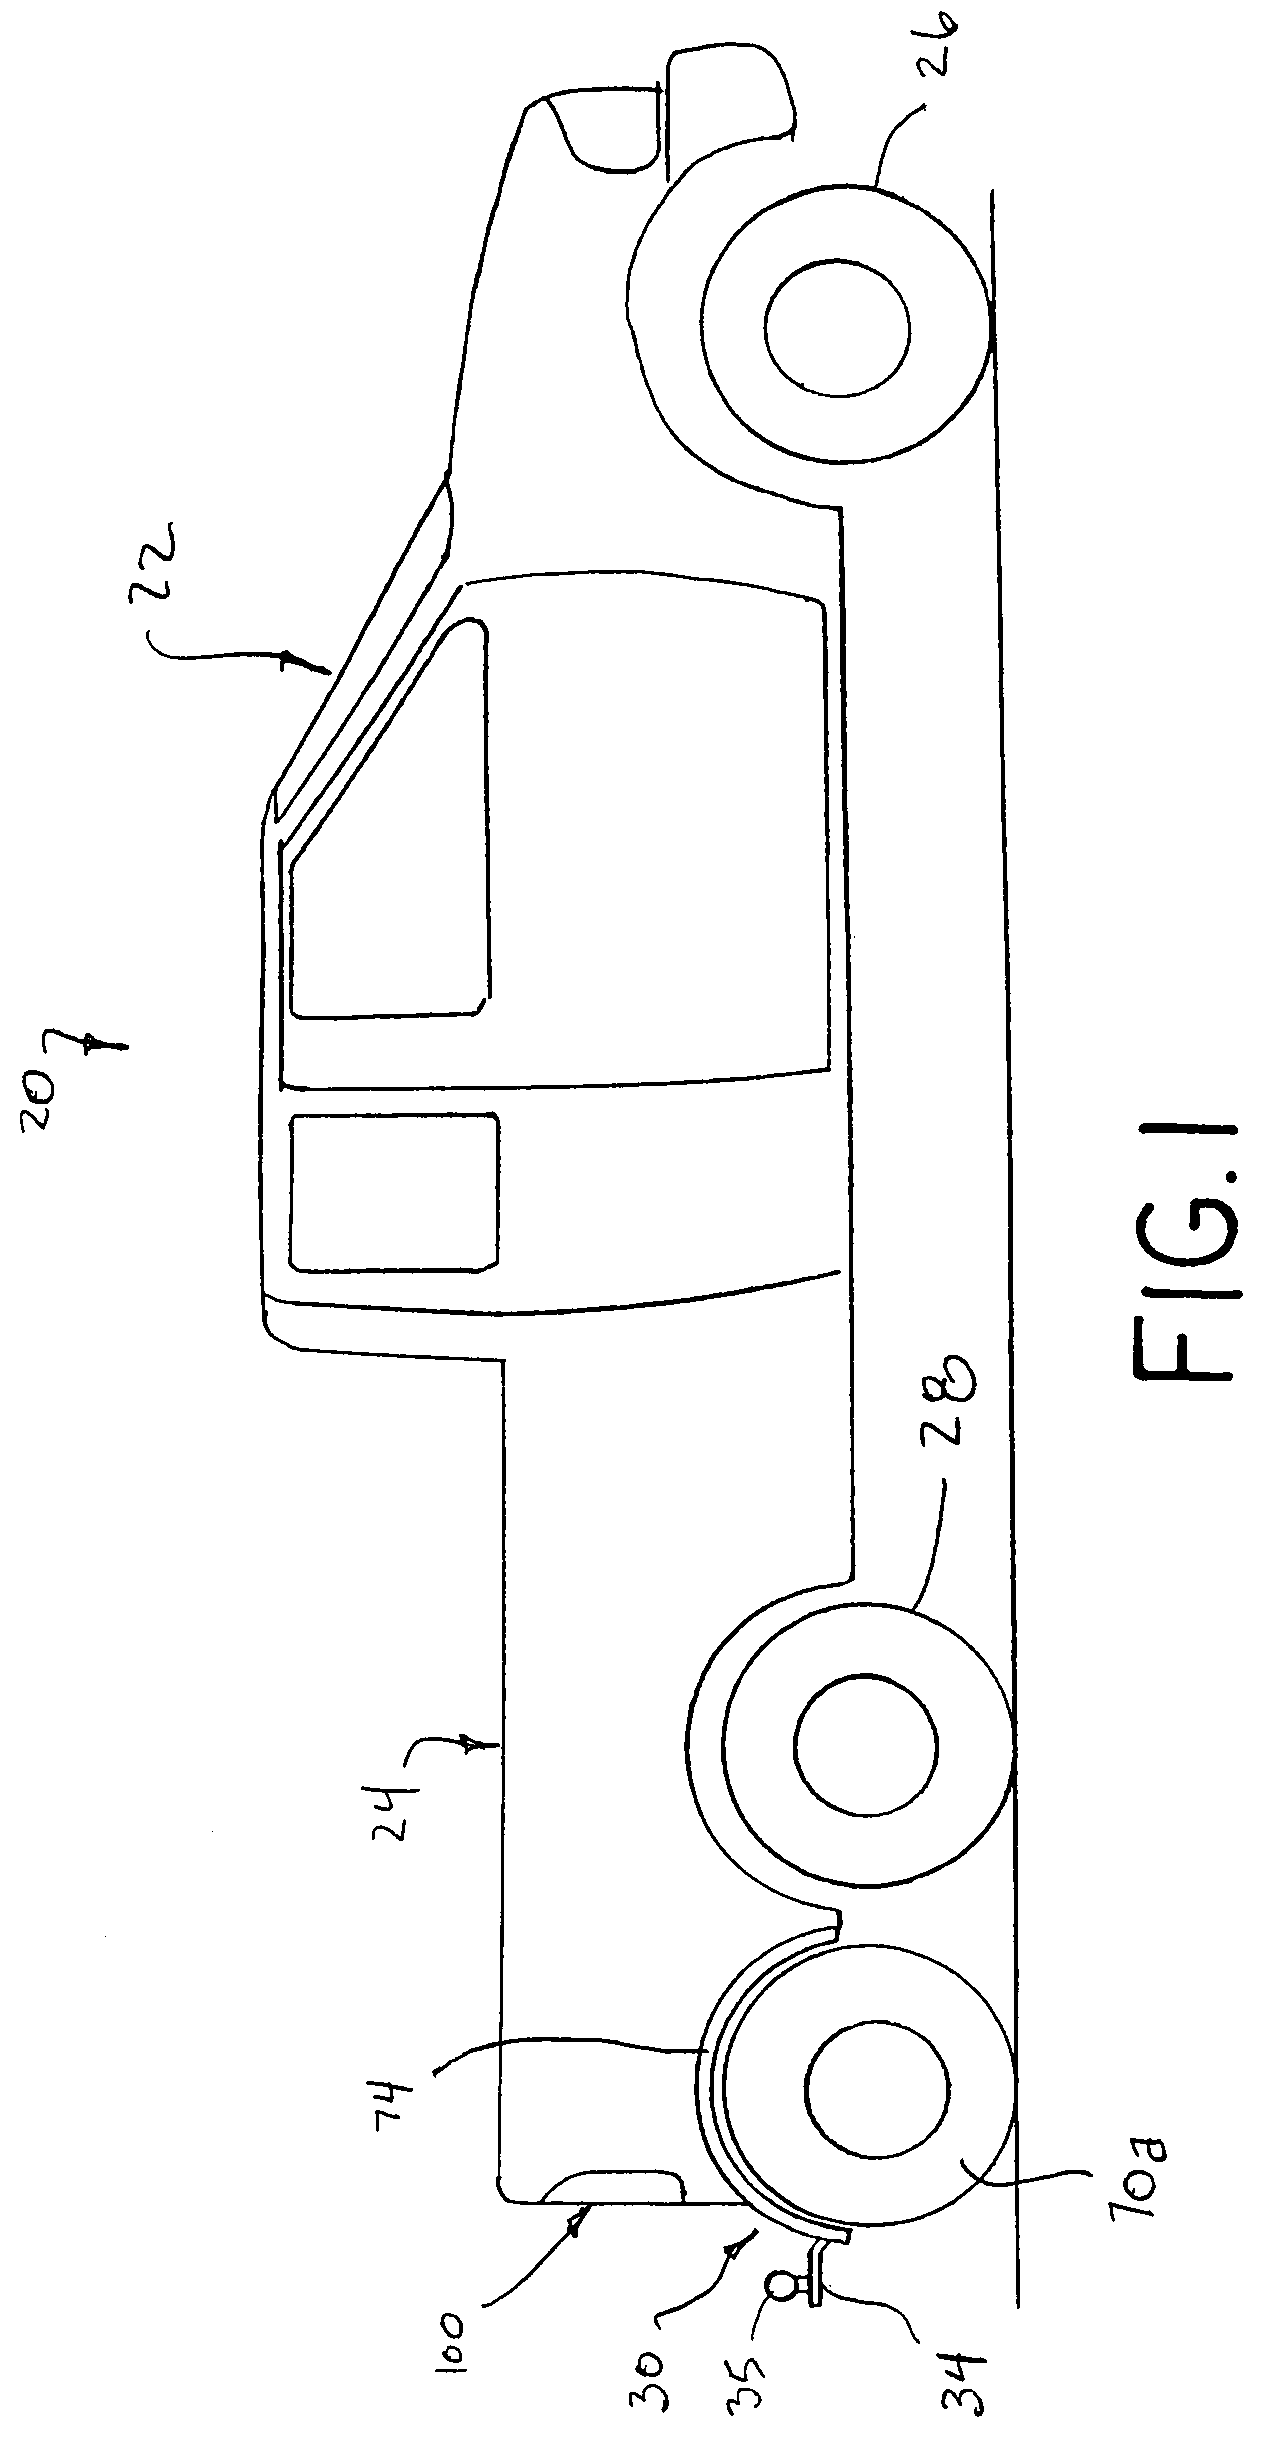 Detachable axle and hitch assembly